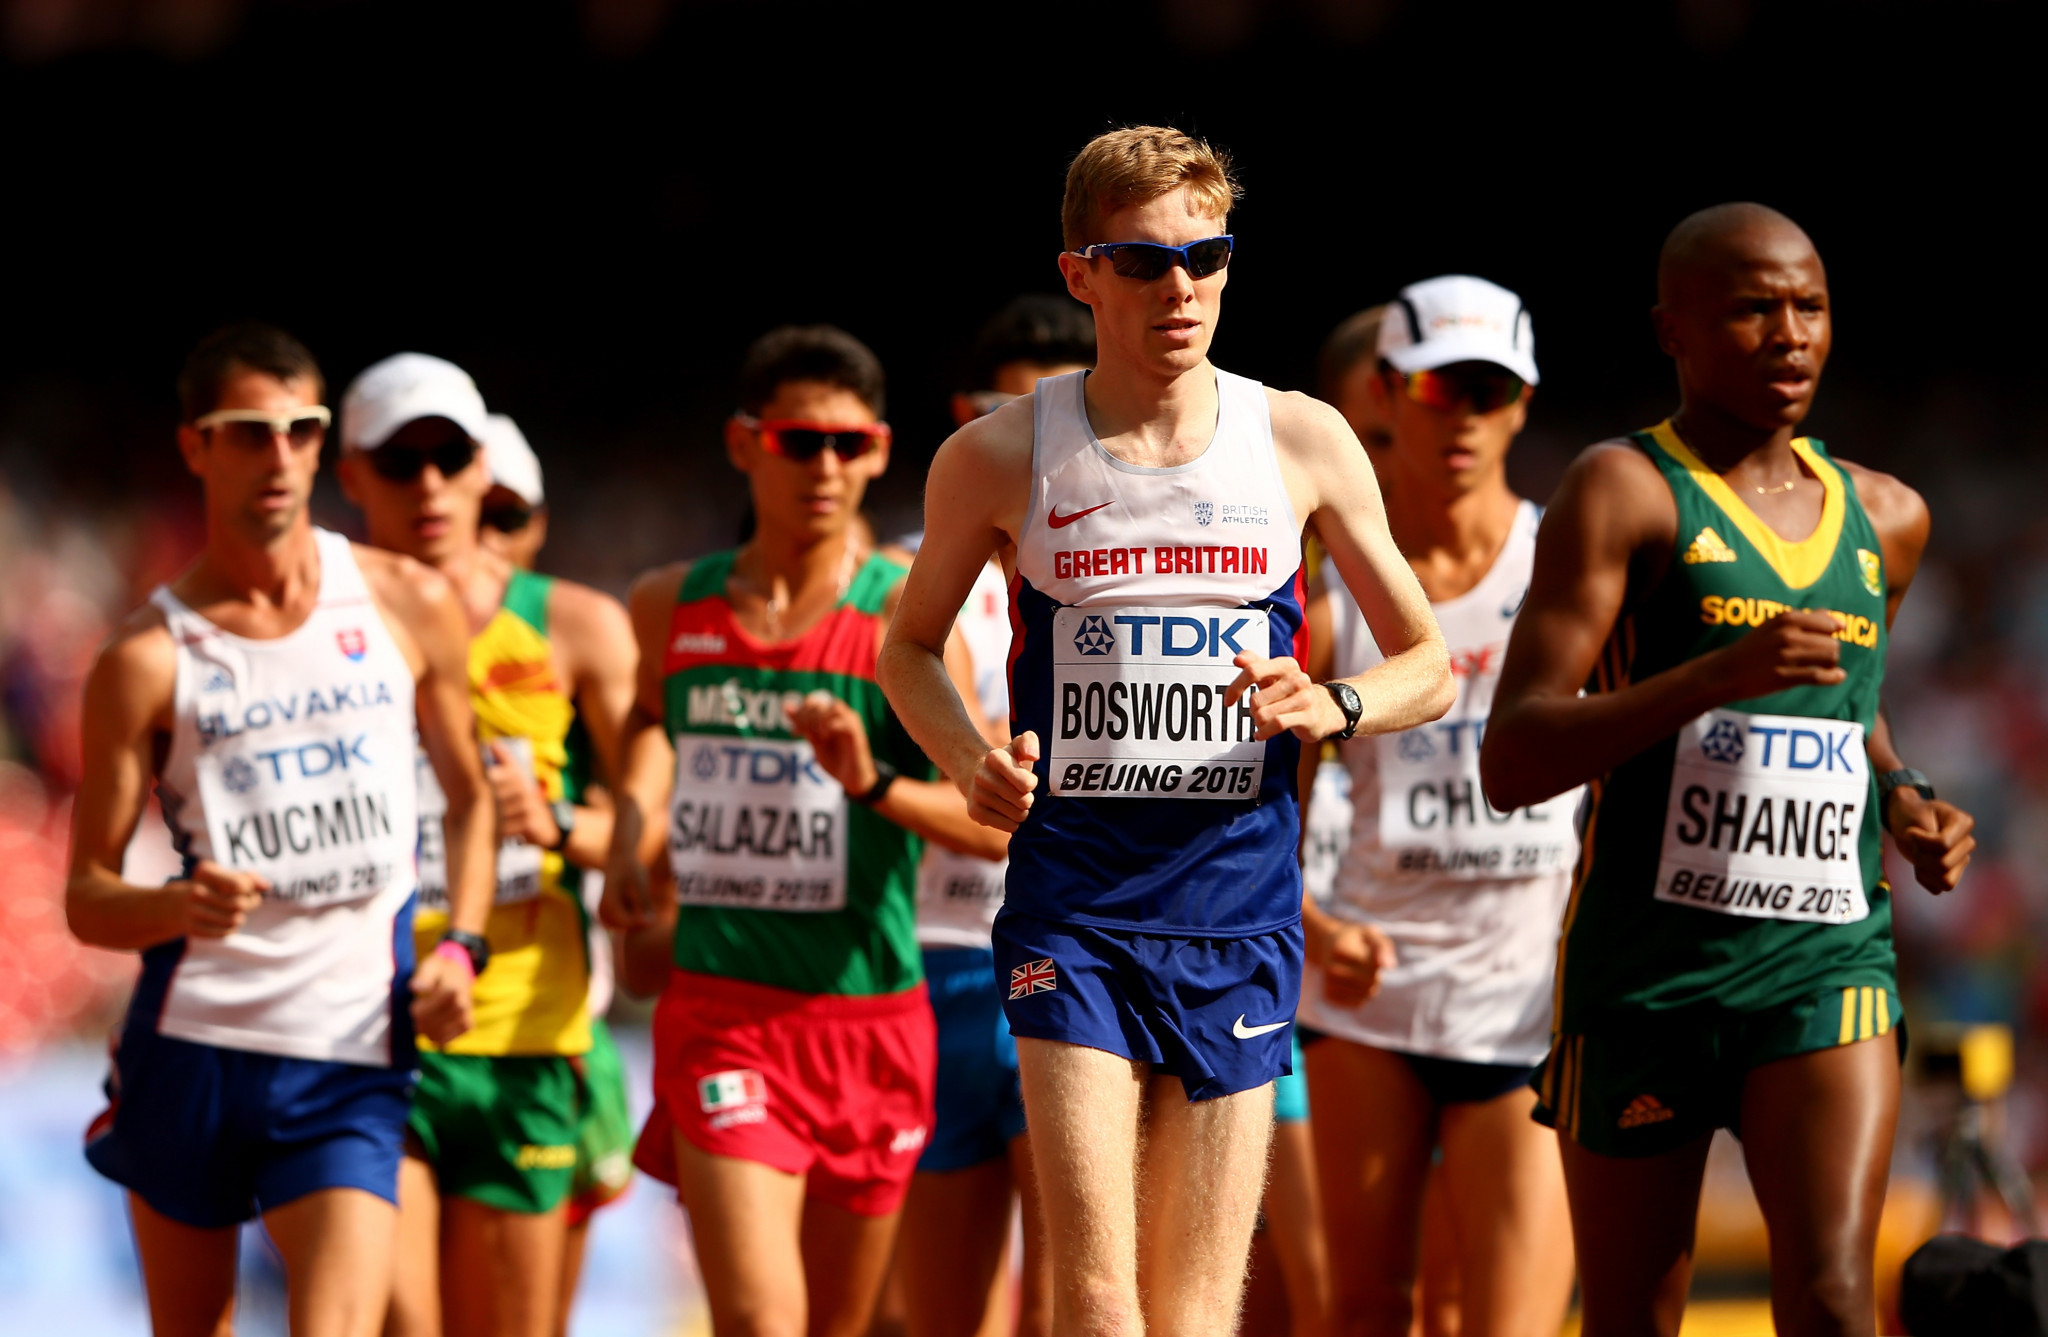 South African race walker facing four-year ban after positive test for steroids